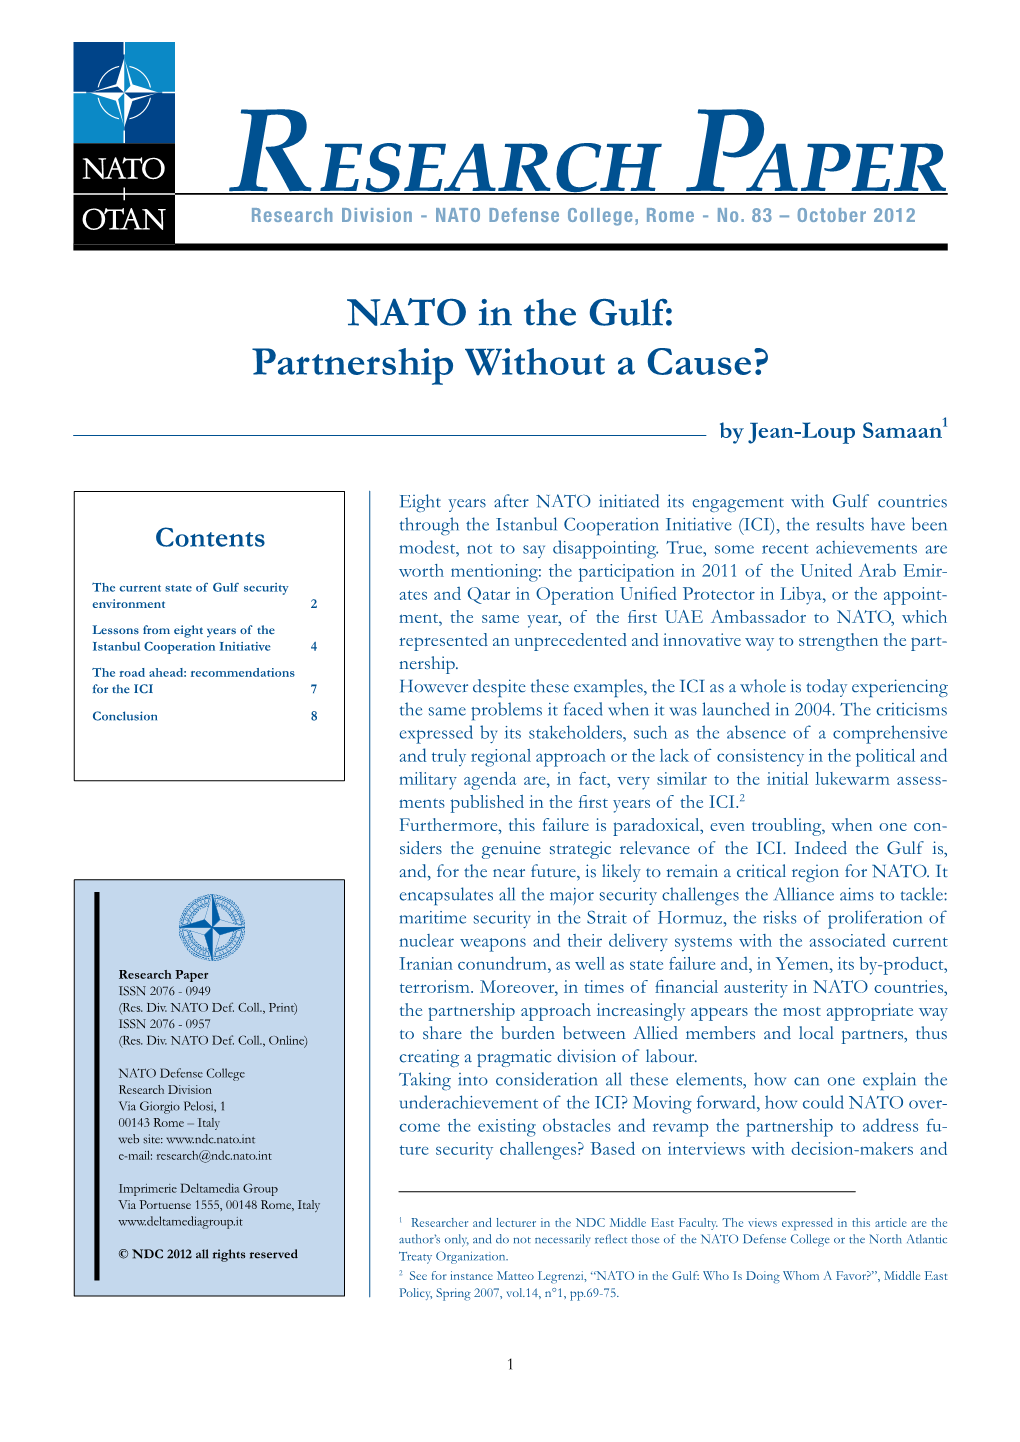 NATO in the Gulf: Partnership Without a Cause?